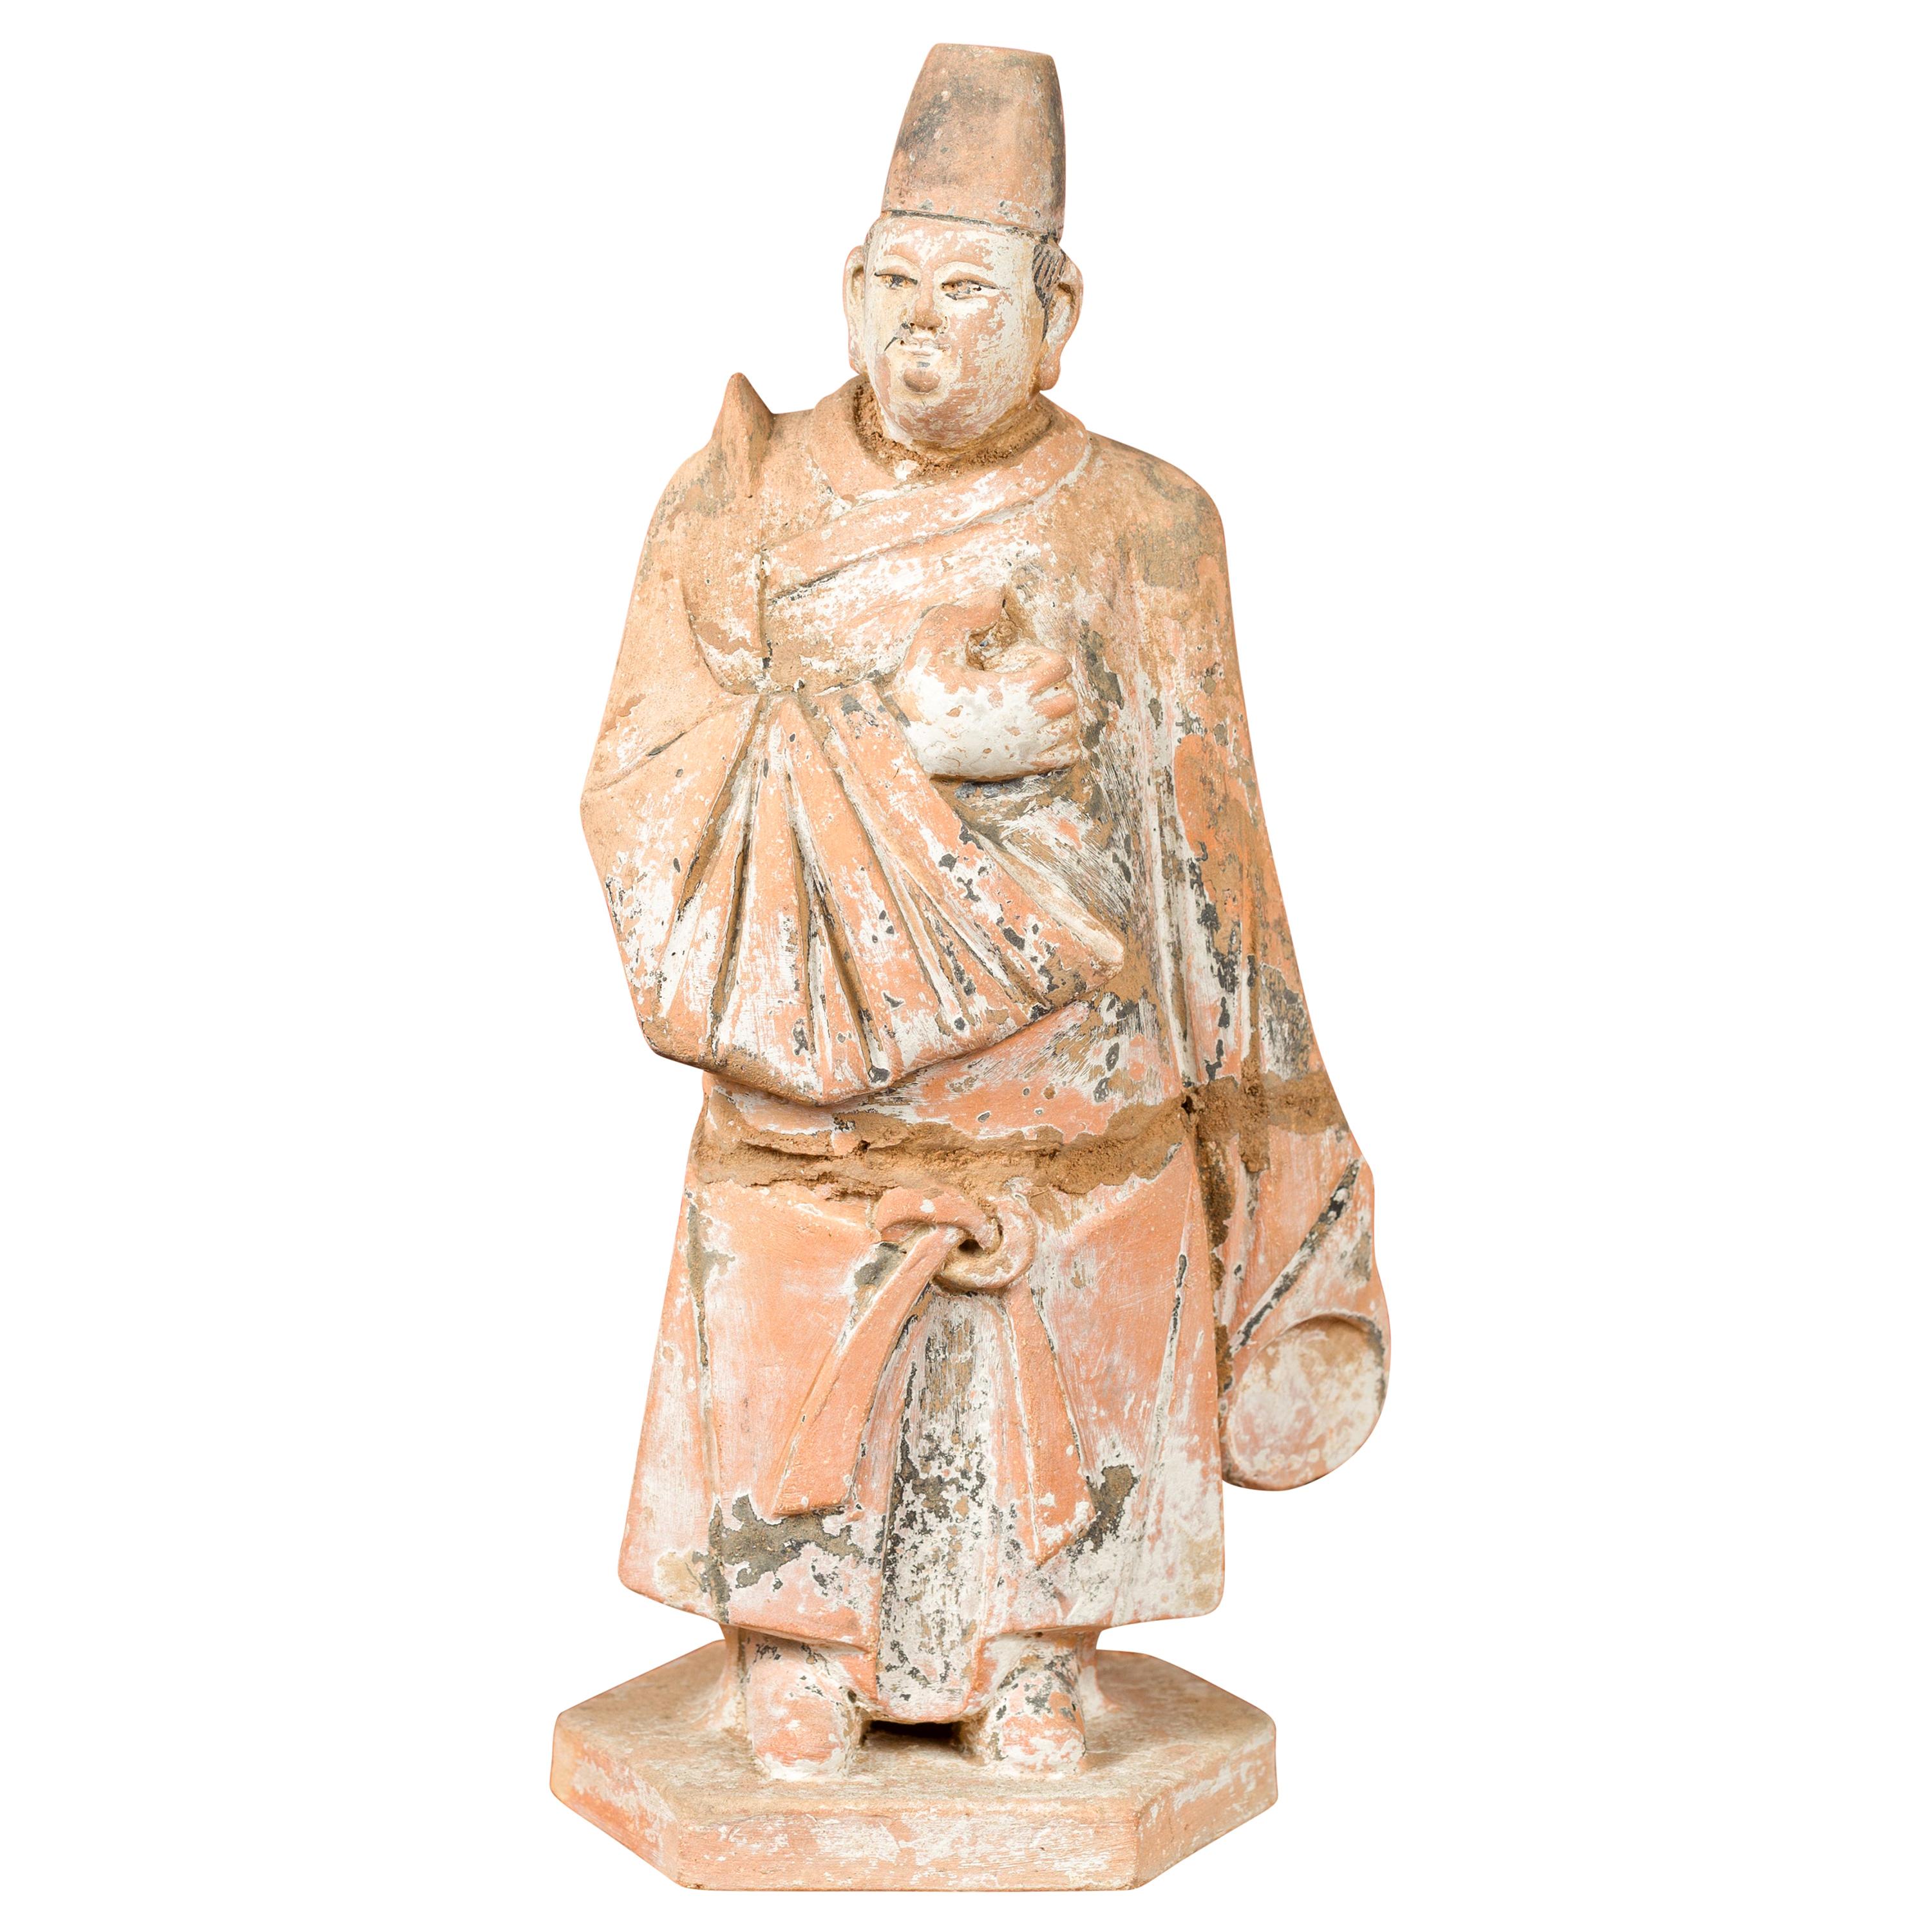 Tang Dynasty Chinese Court Official Terracotta Sculpture with Original Paint